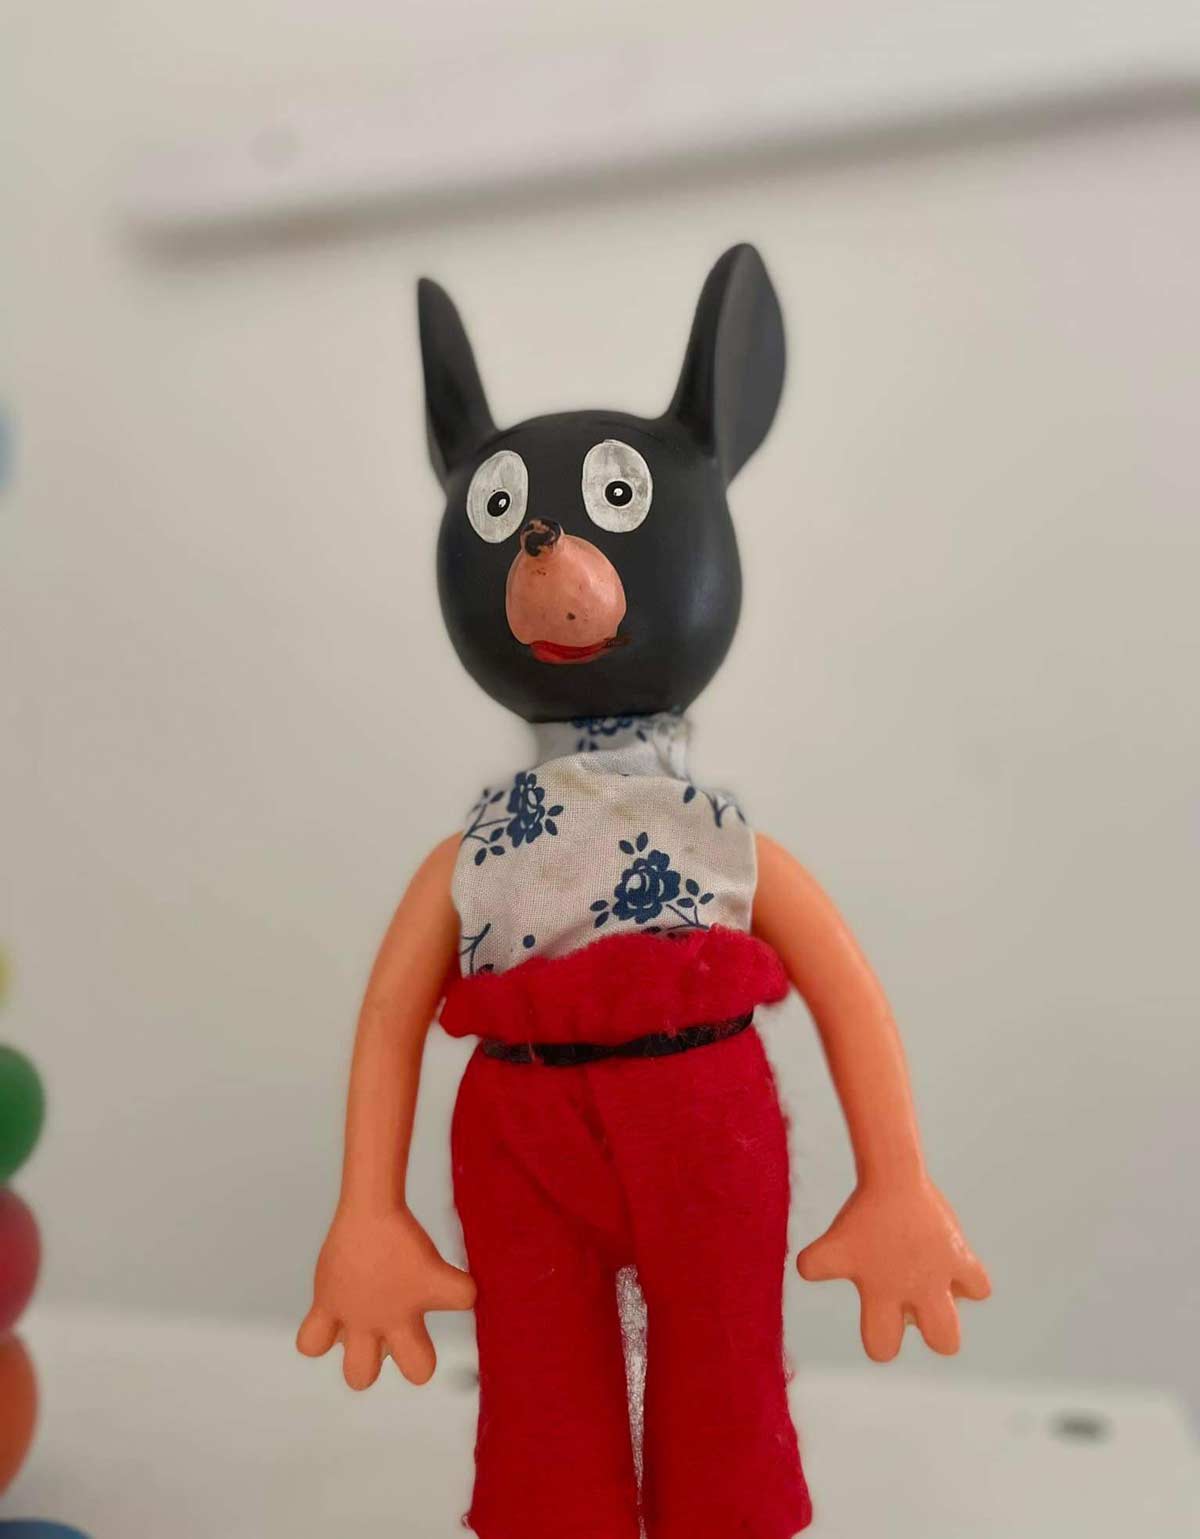 This vintage soviet Mickey Mouse doll